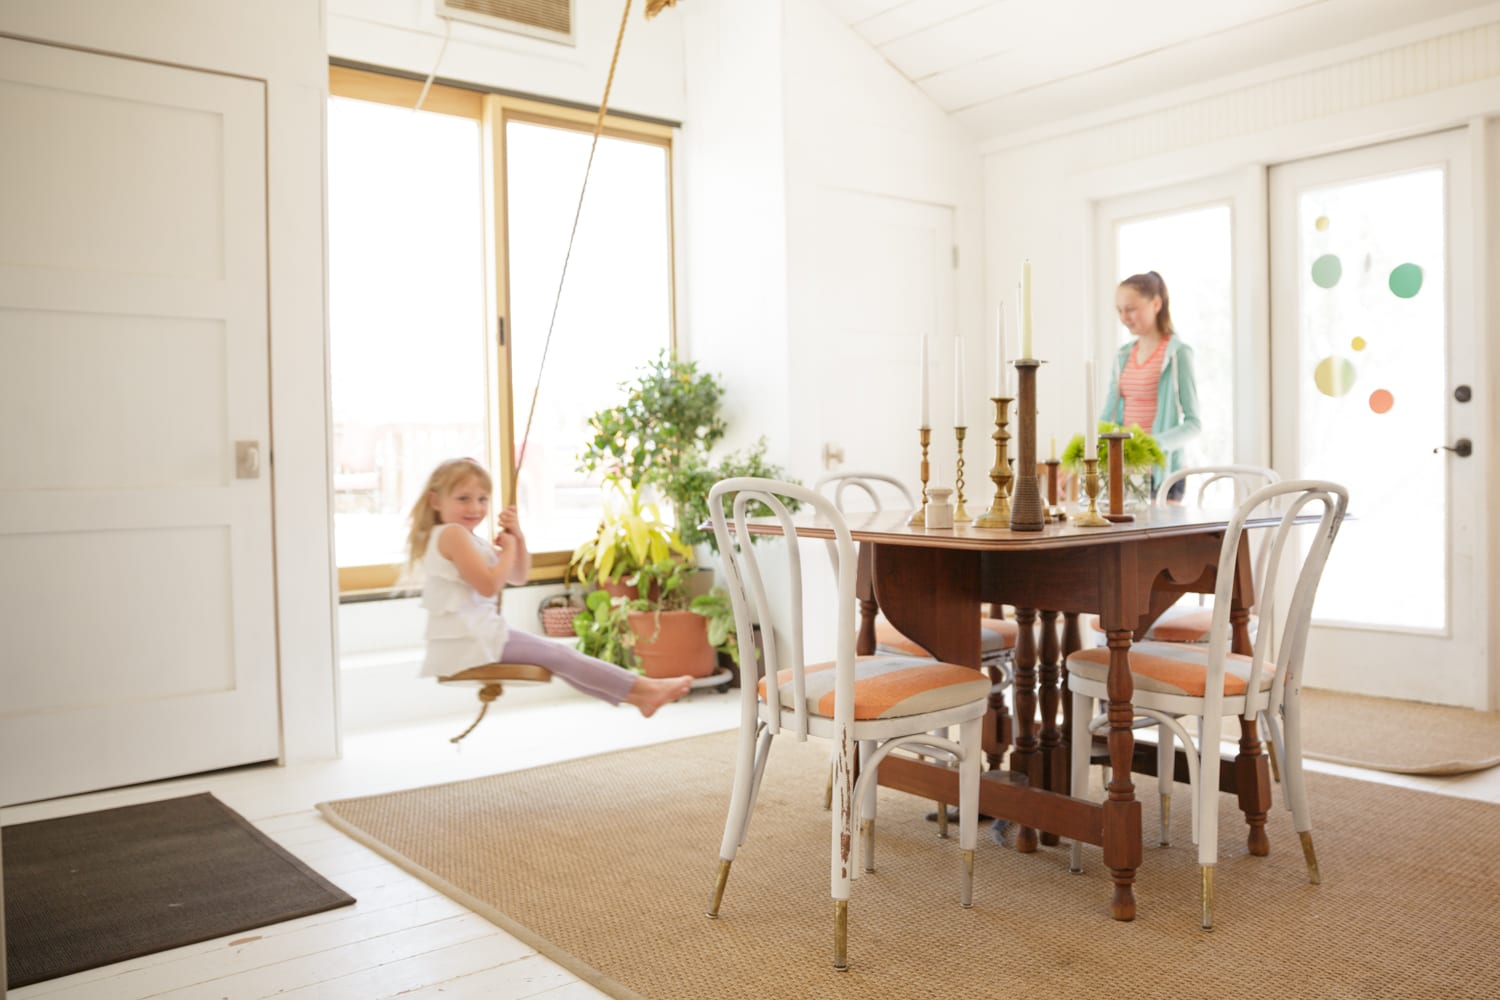 Private Tour A Scalable little girl on swing in house while mom watches